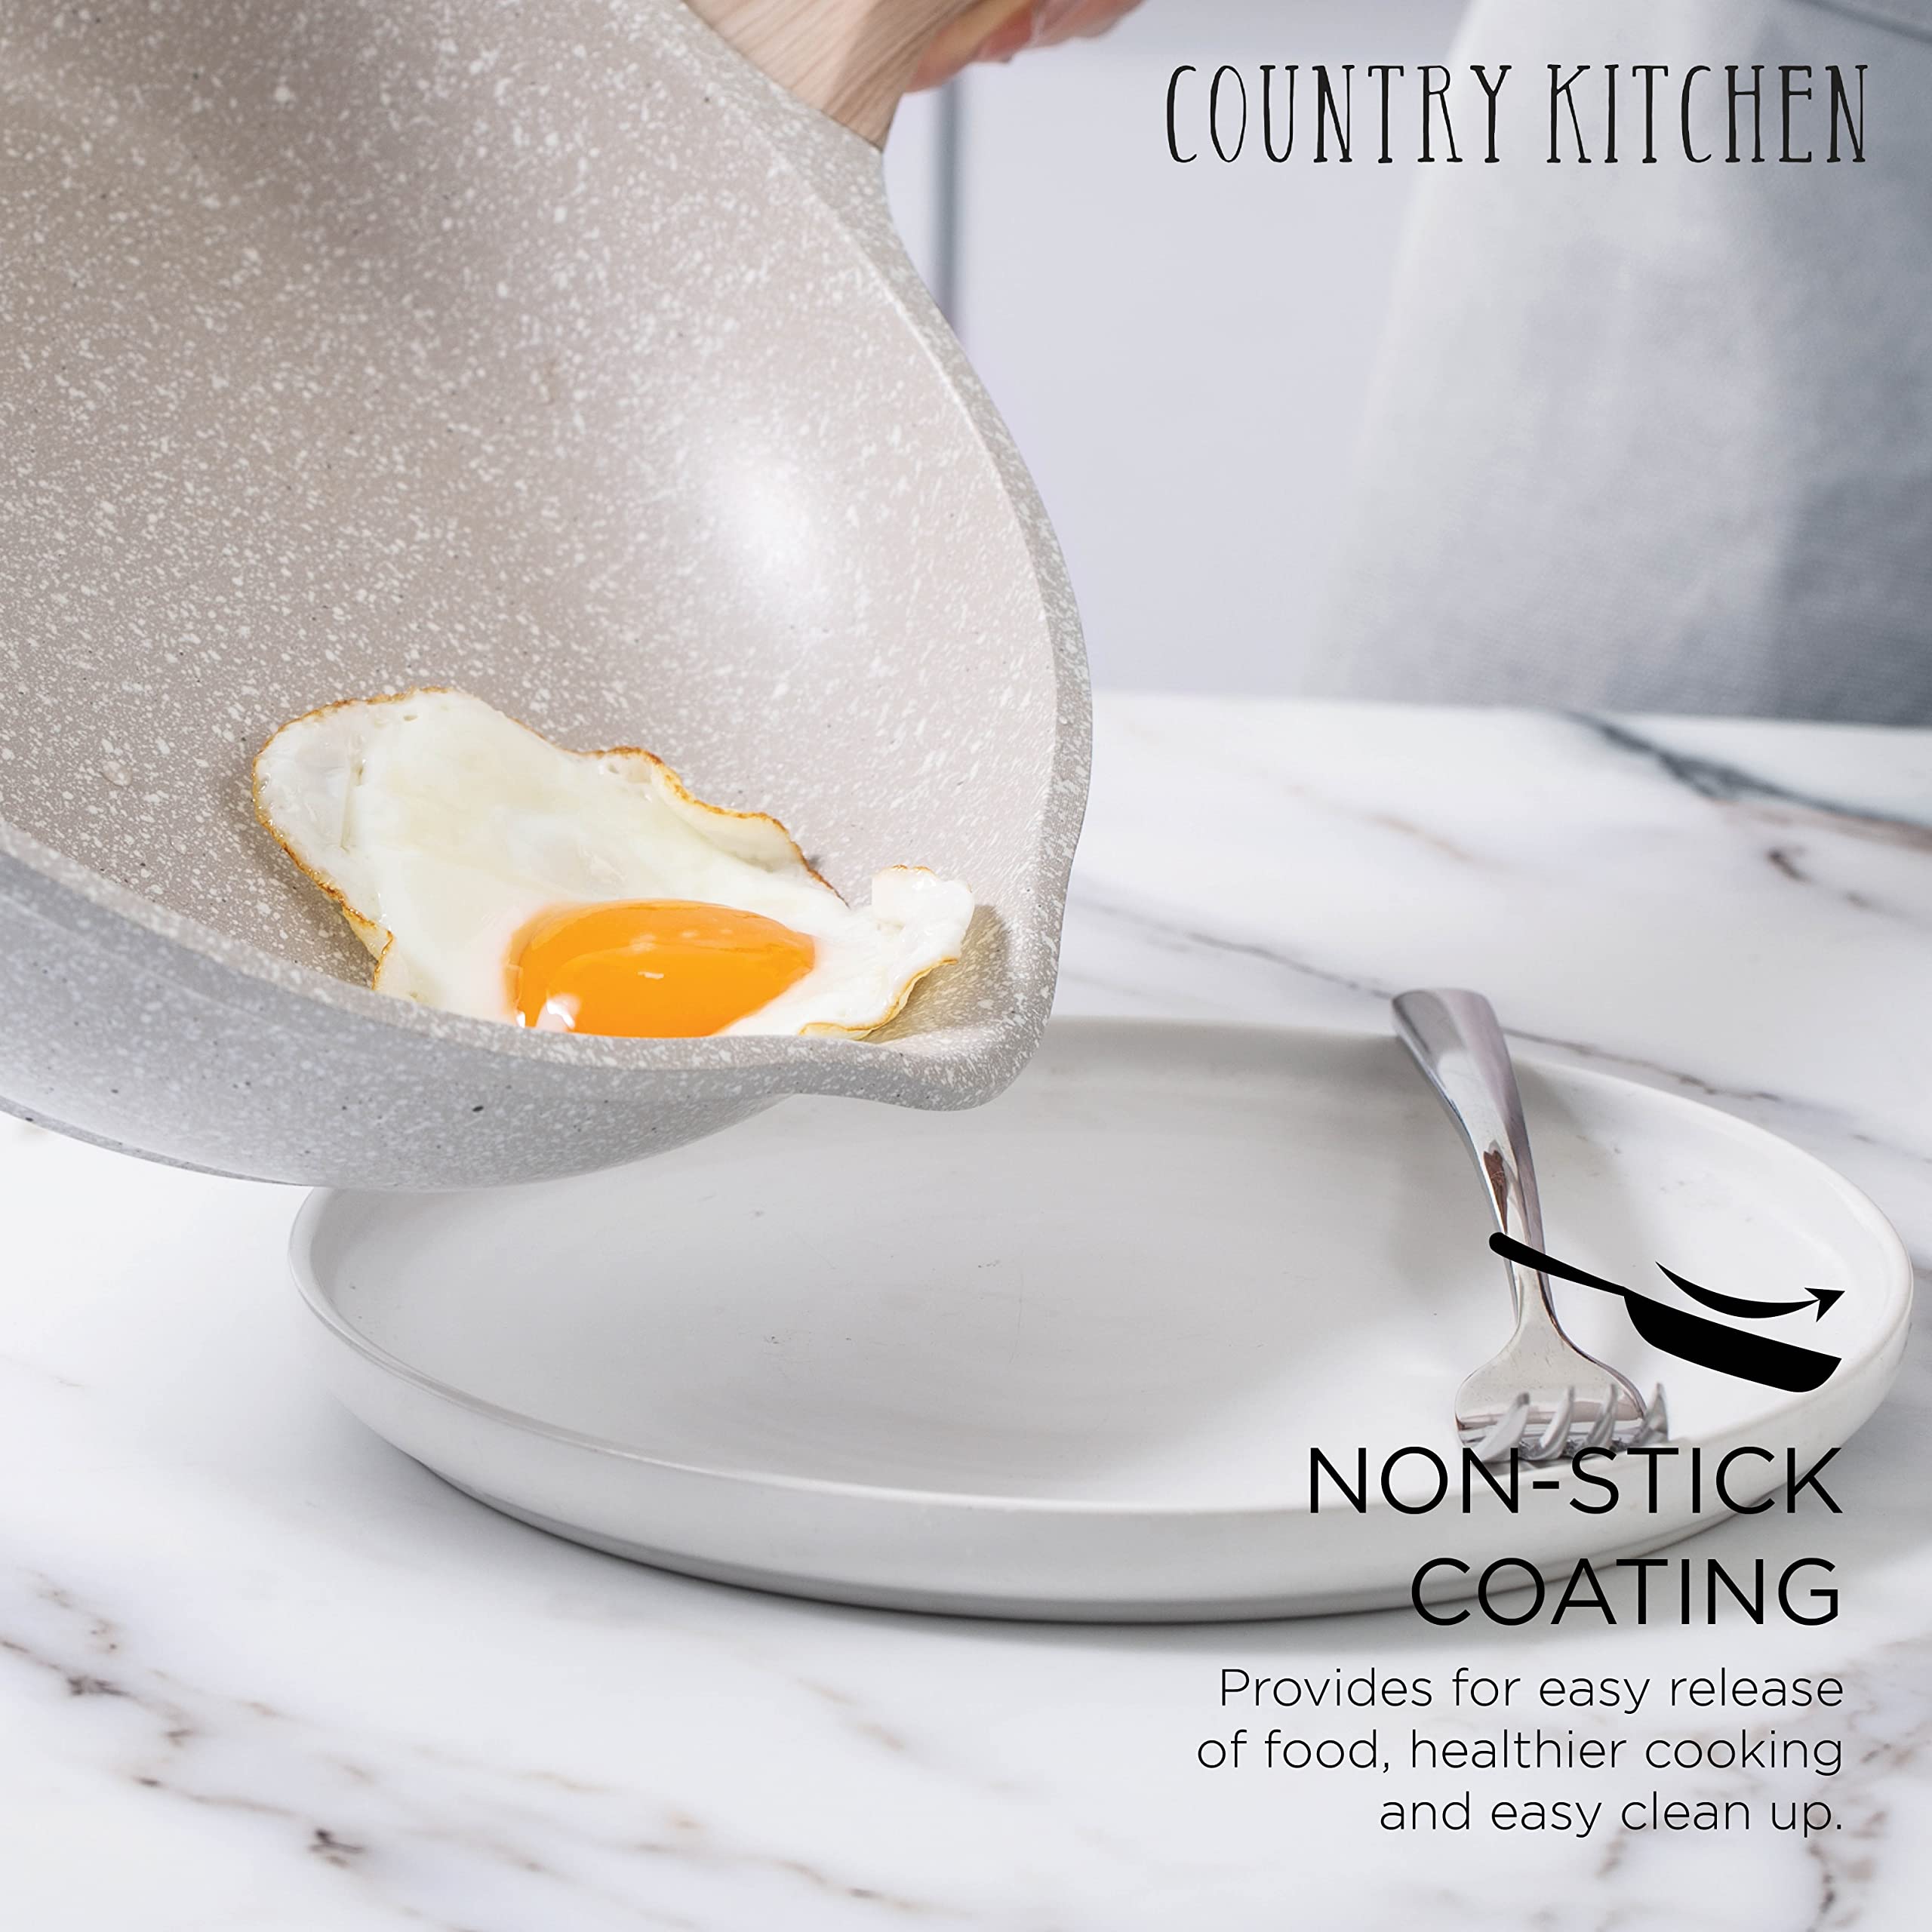 Country Kitchen Nonstick Induction Cookware Sets - 8 Piece Nonstick Cast Aluminum Pots and Pans with BAKELITE Handles - Non-Toxic Pots and Pans- Speckled Cream with Light Wood Handles